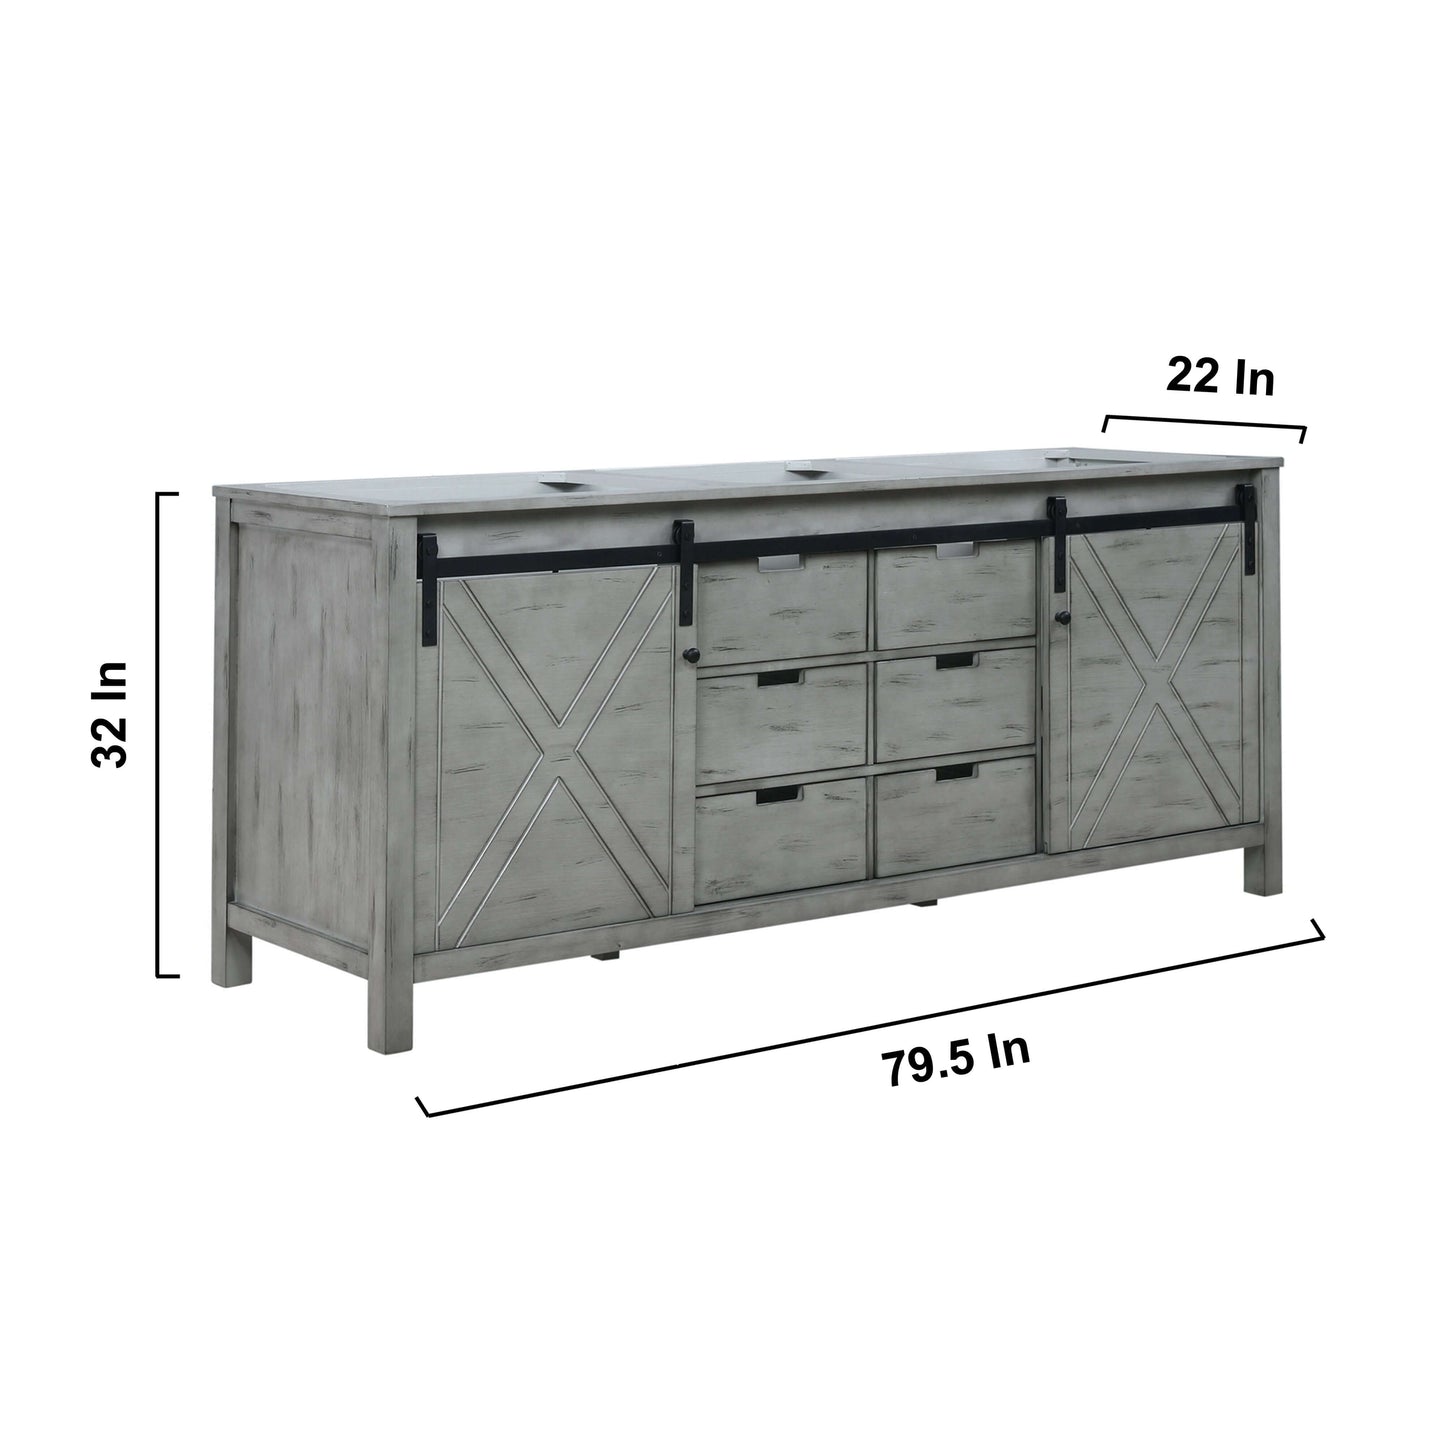 Marsyas 80" Ash Grey Double Vanity Cabinet Only - LM342280DH00000